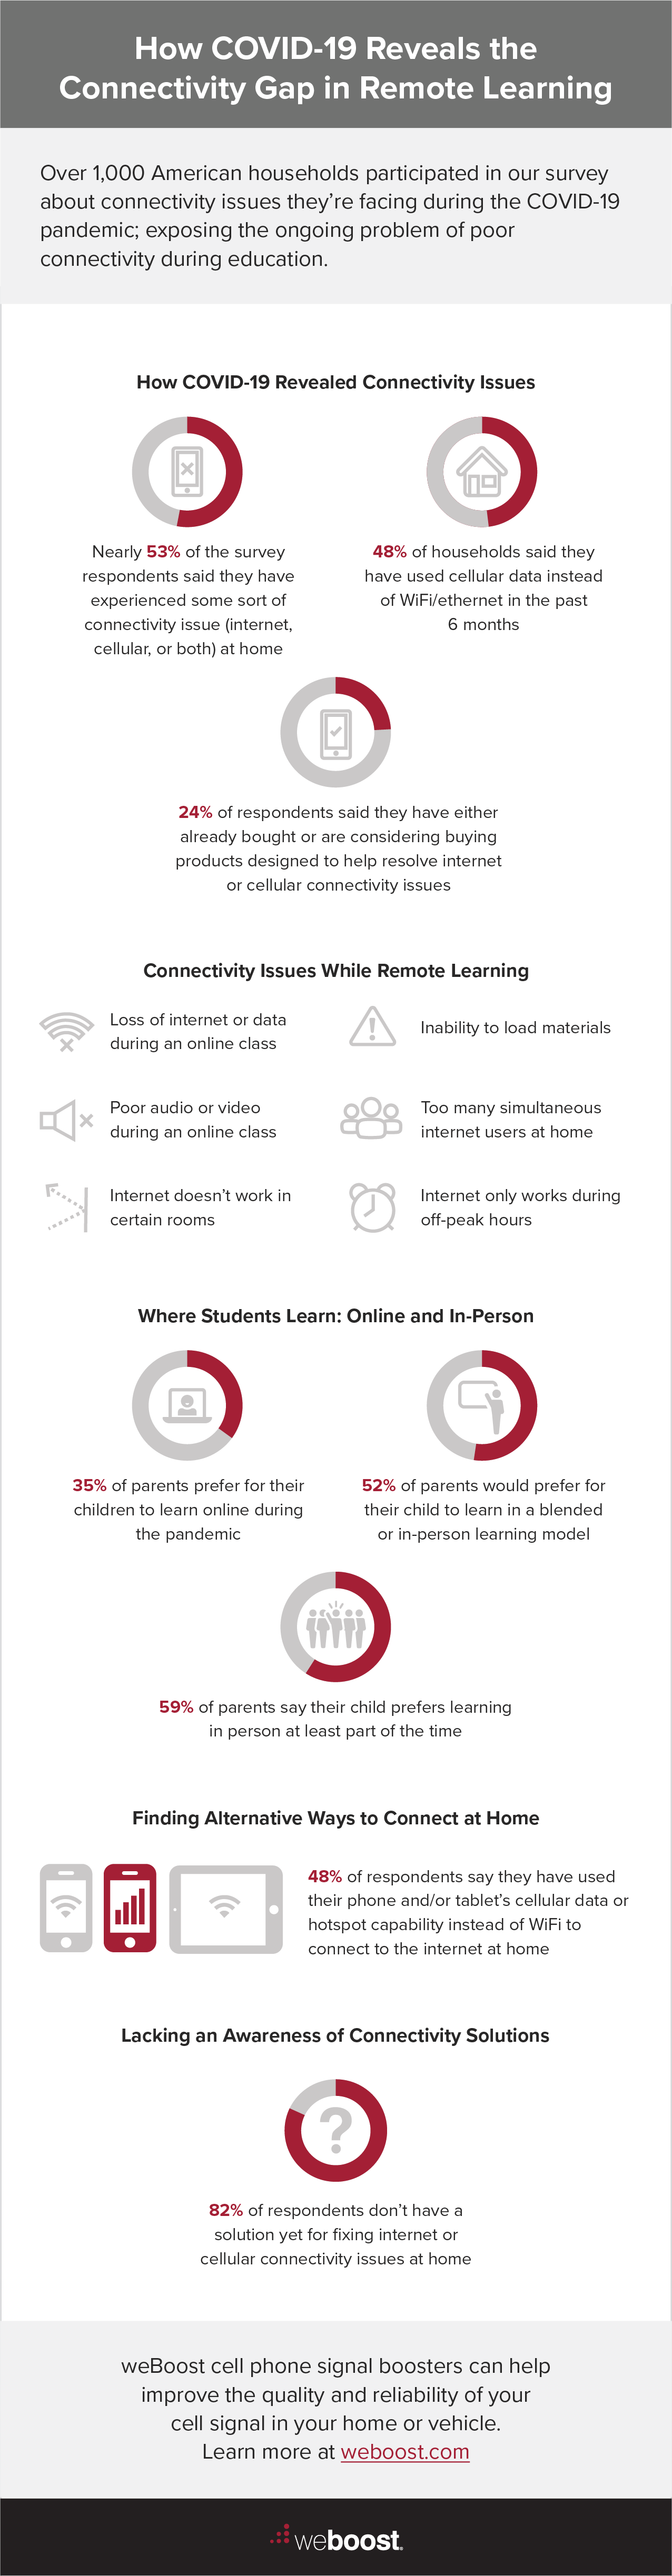 how covid-19 reveals the connectivity gap in remote learning infographic